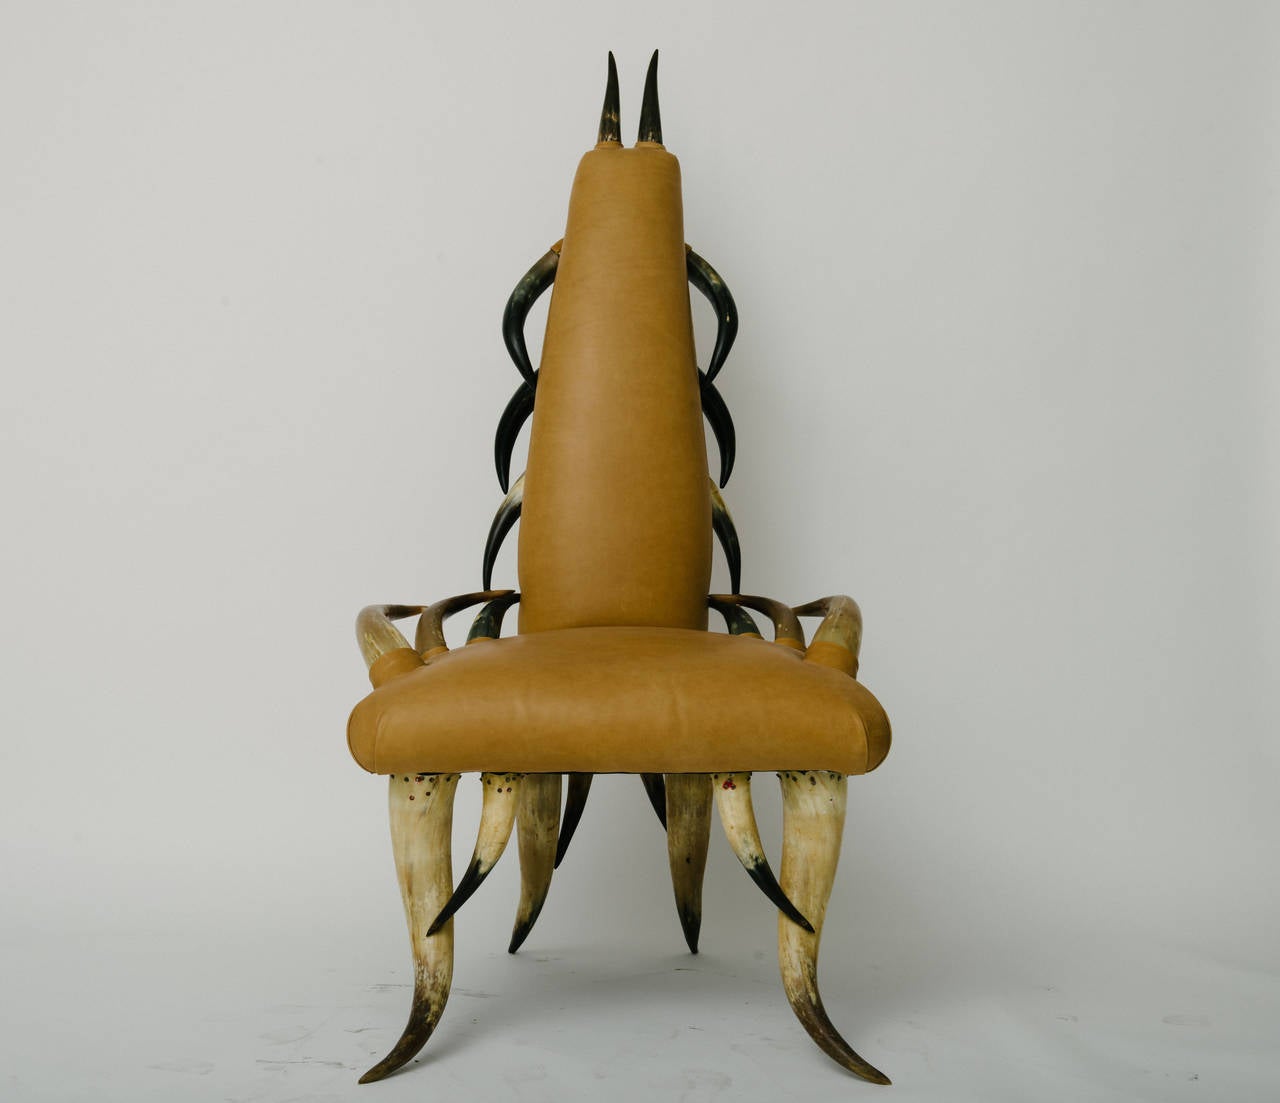 Vintage leather horn chair.